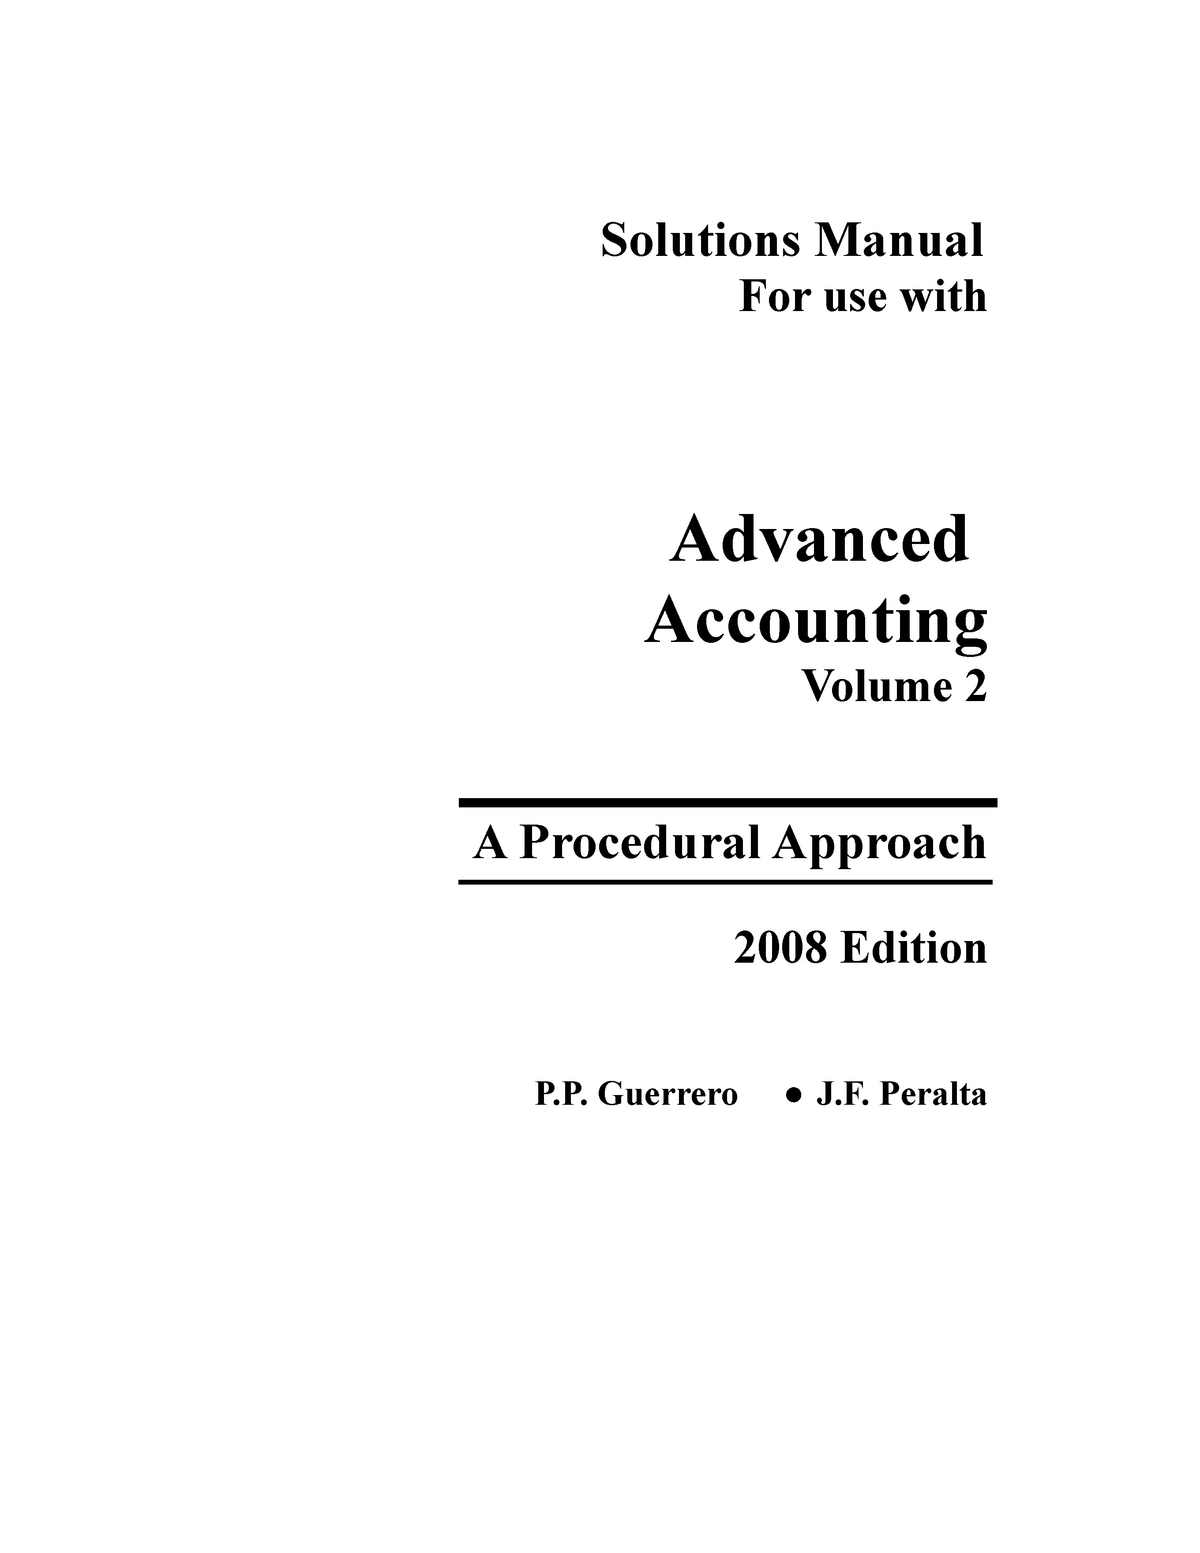 advanced-accounting-volume-2-1-solutions-manual-for-use-with-advanced